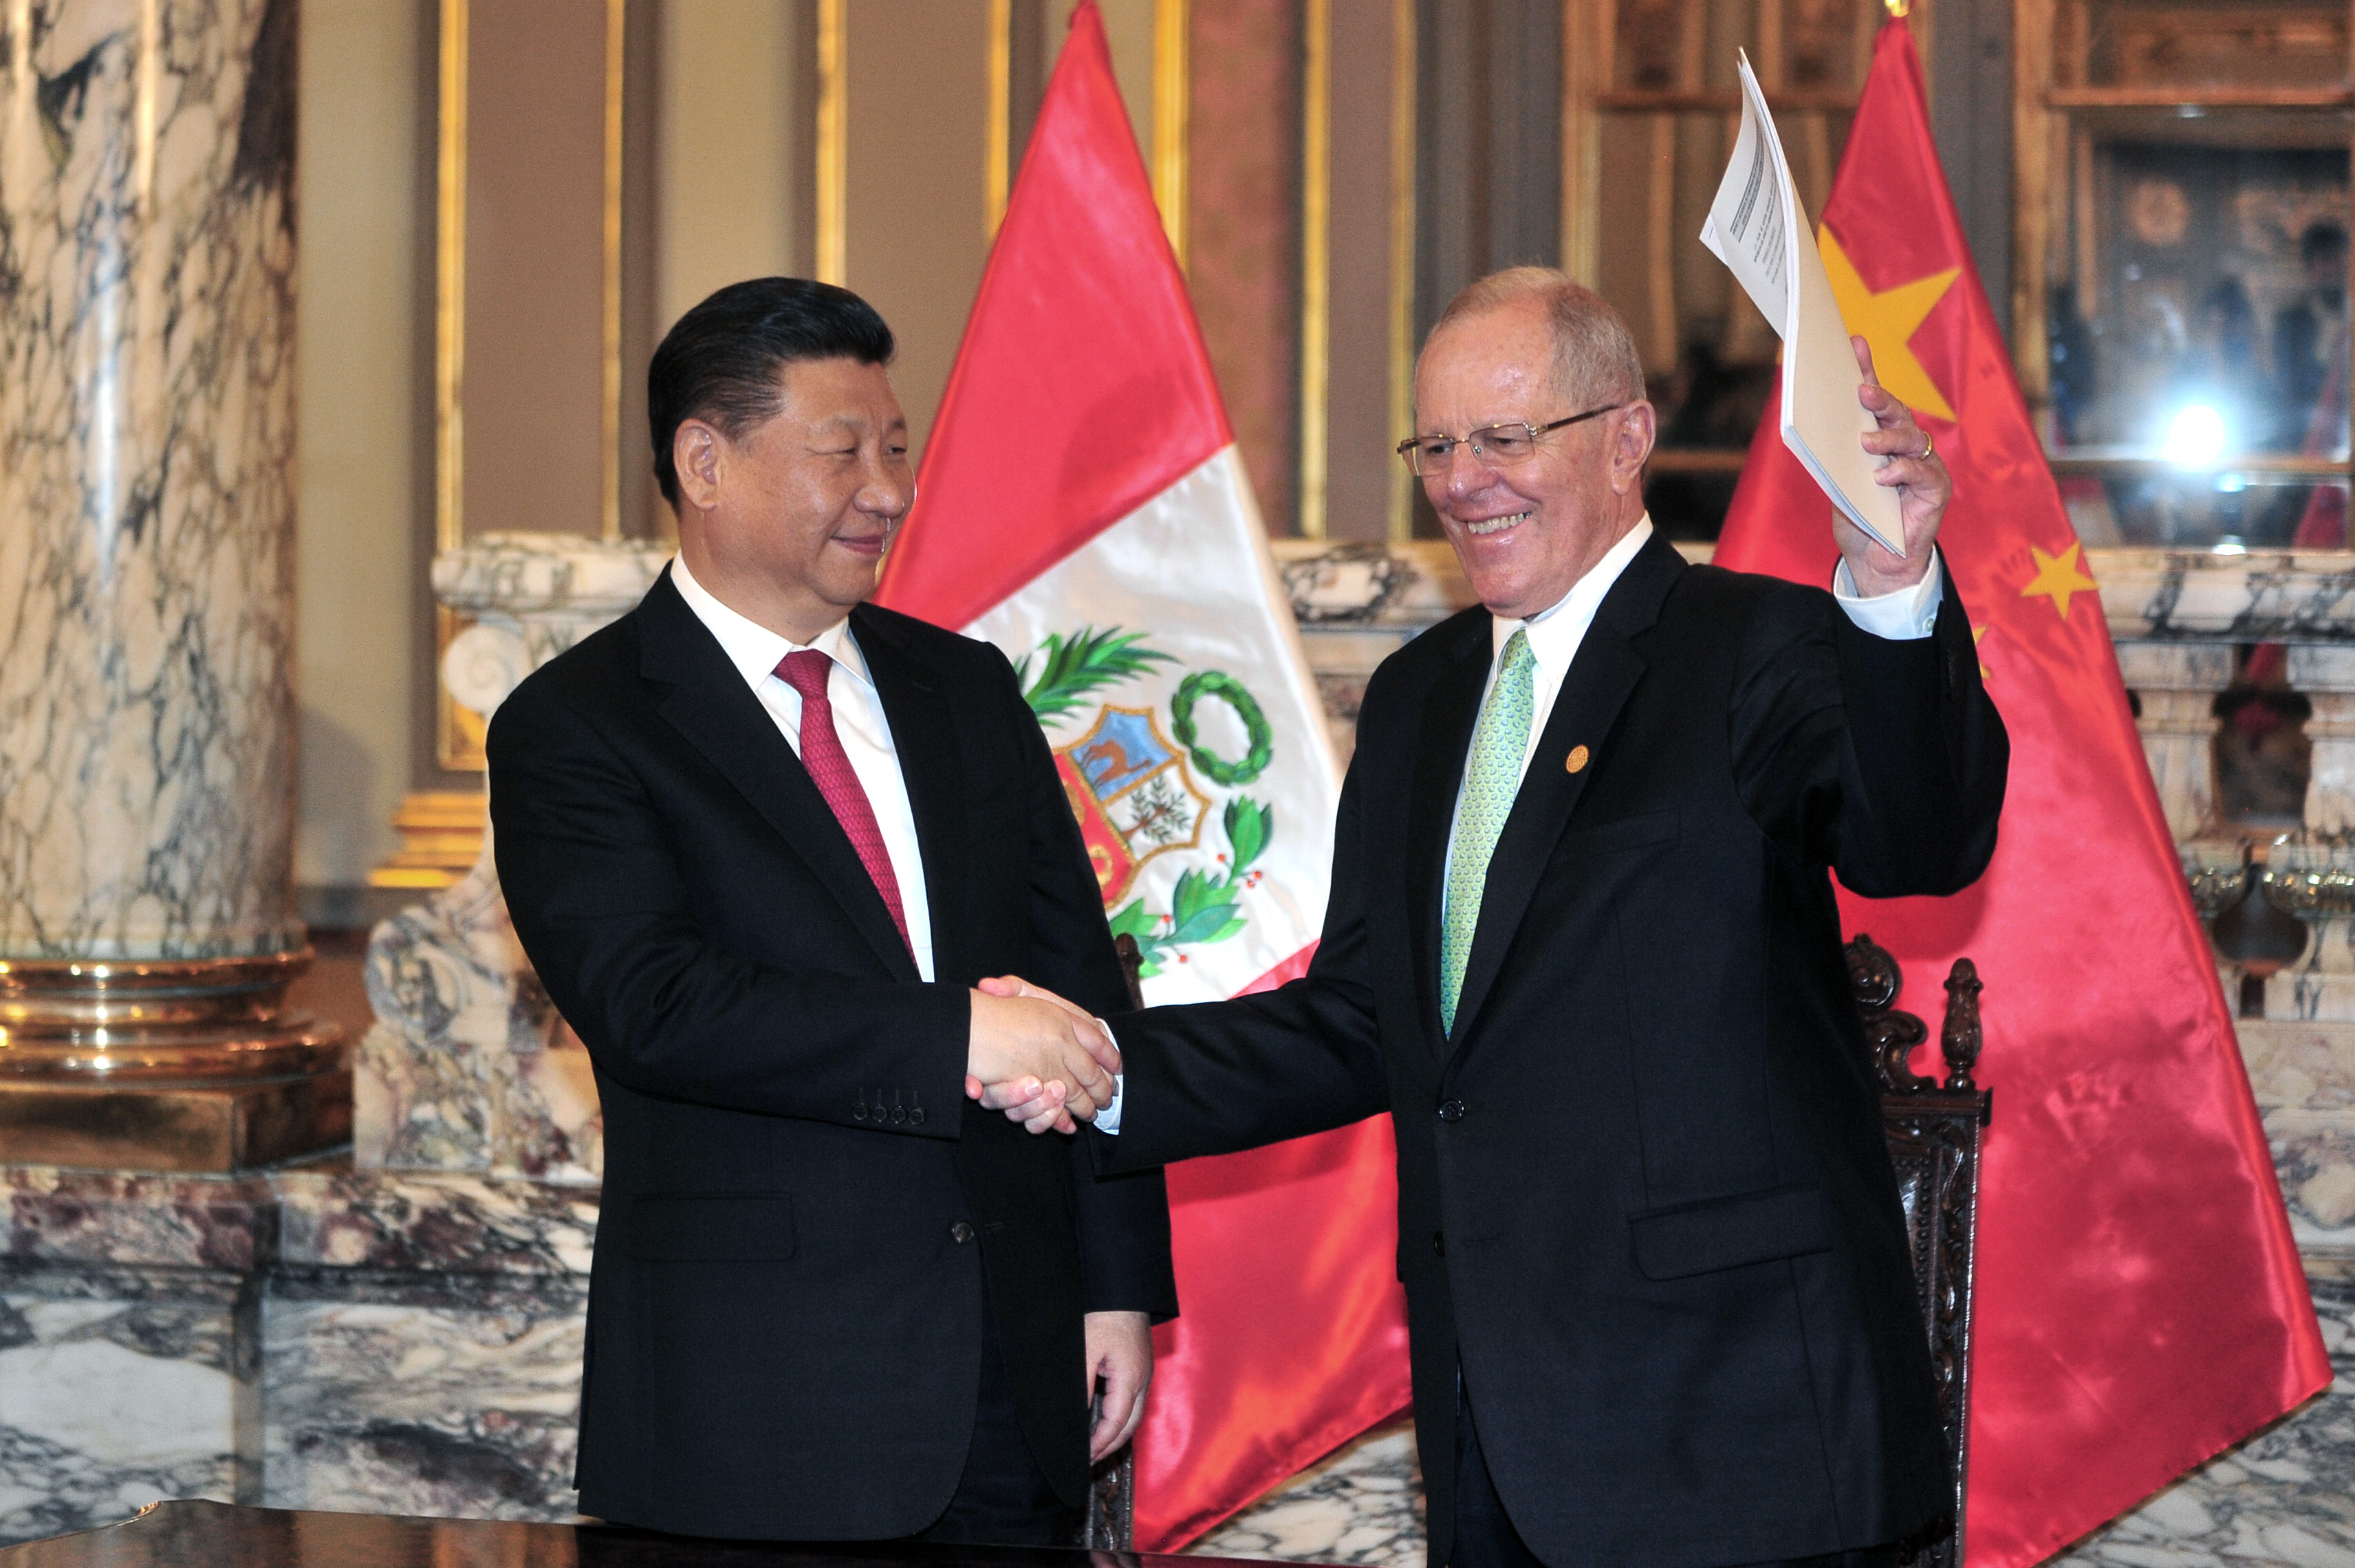 Peru's President Pedro Pablo Kuczynski (R) and China's President Xi Jinping (L) shake hands during a ceremony after signing bilateral agreements at the government palace in Lima on November 21, 2016.  / AFP PHOTO / RAFAEL ZARAUZ